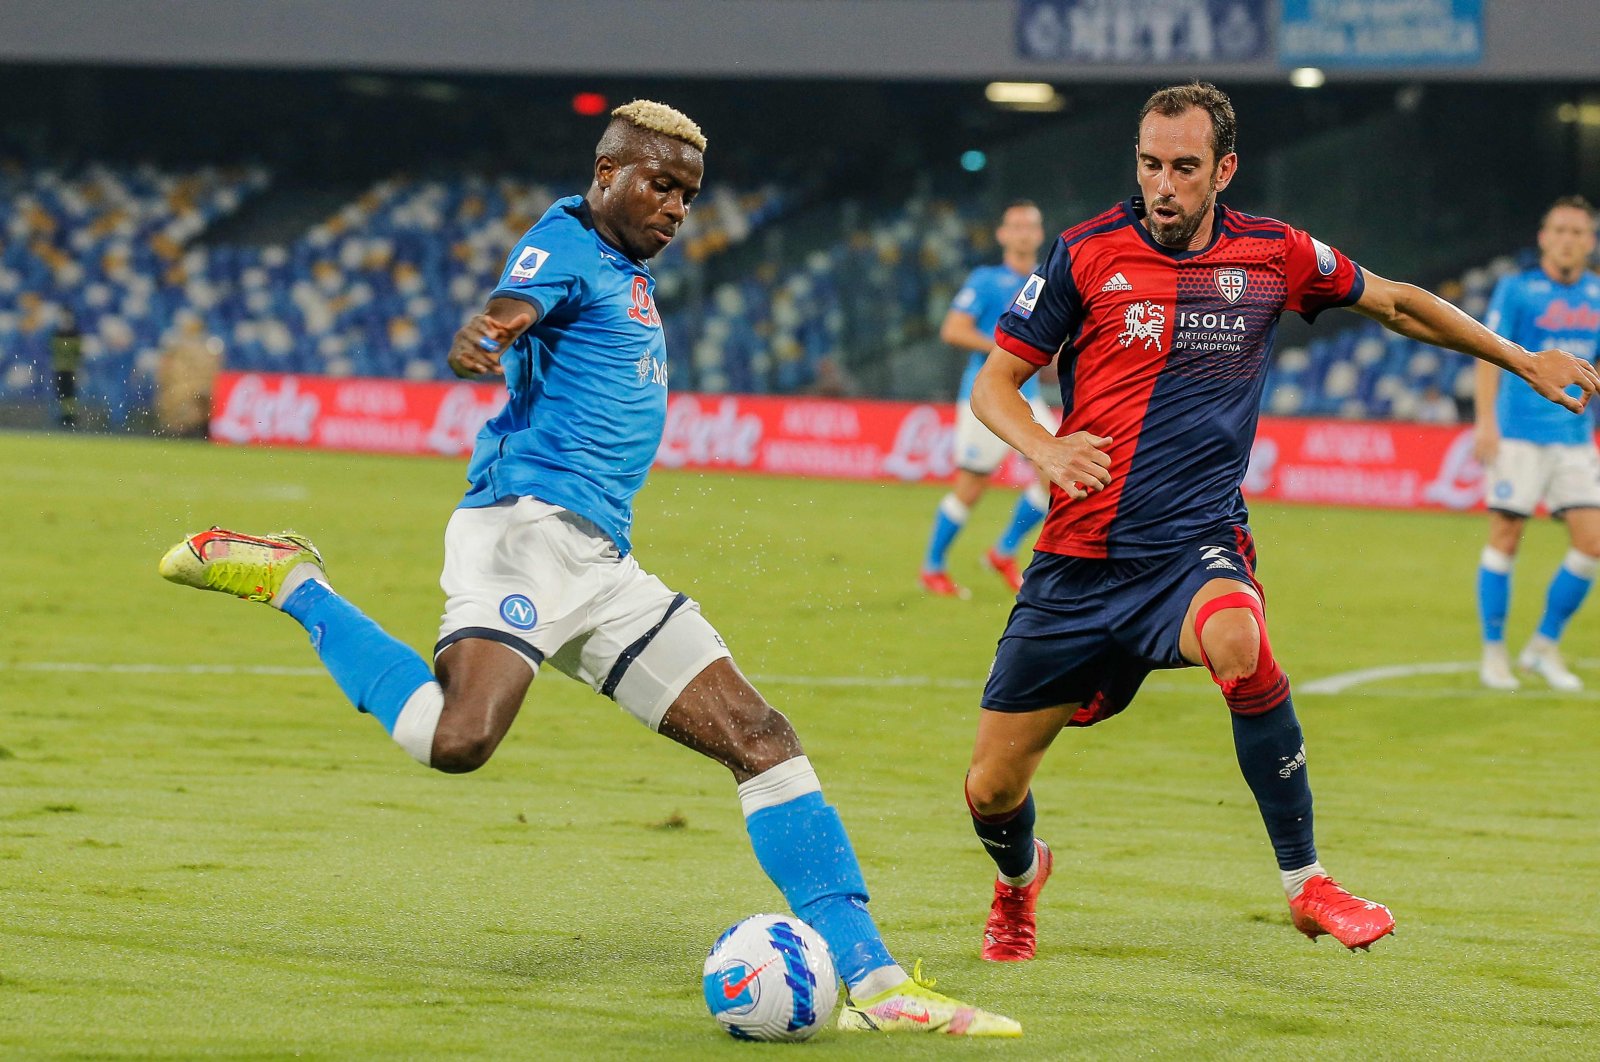 Napoli's Victor Osimhen (L) tries to shoot past Cagliari's Diego Godin during a Serie A match at the Diego-Maradona stadium in Naples, Italy, Sept. 26, 2021. (AFP Photo)